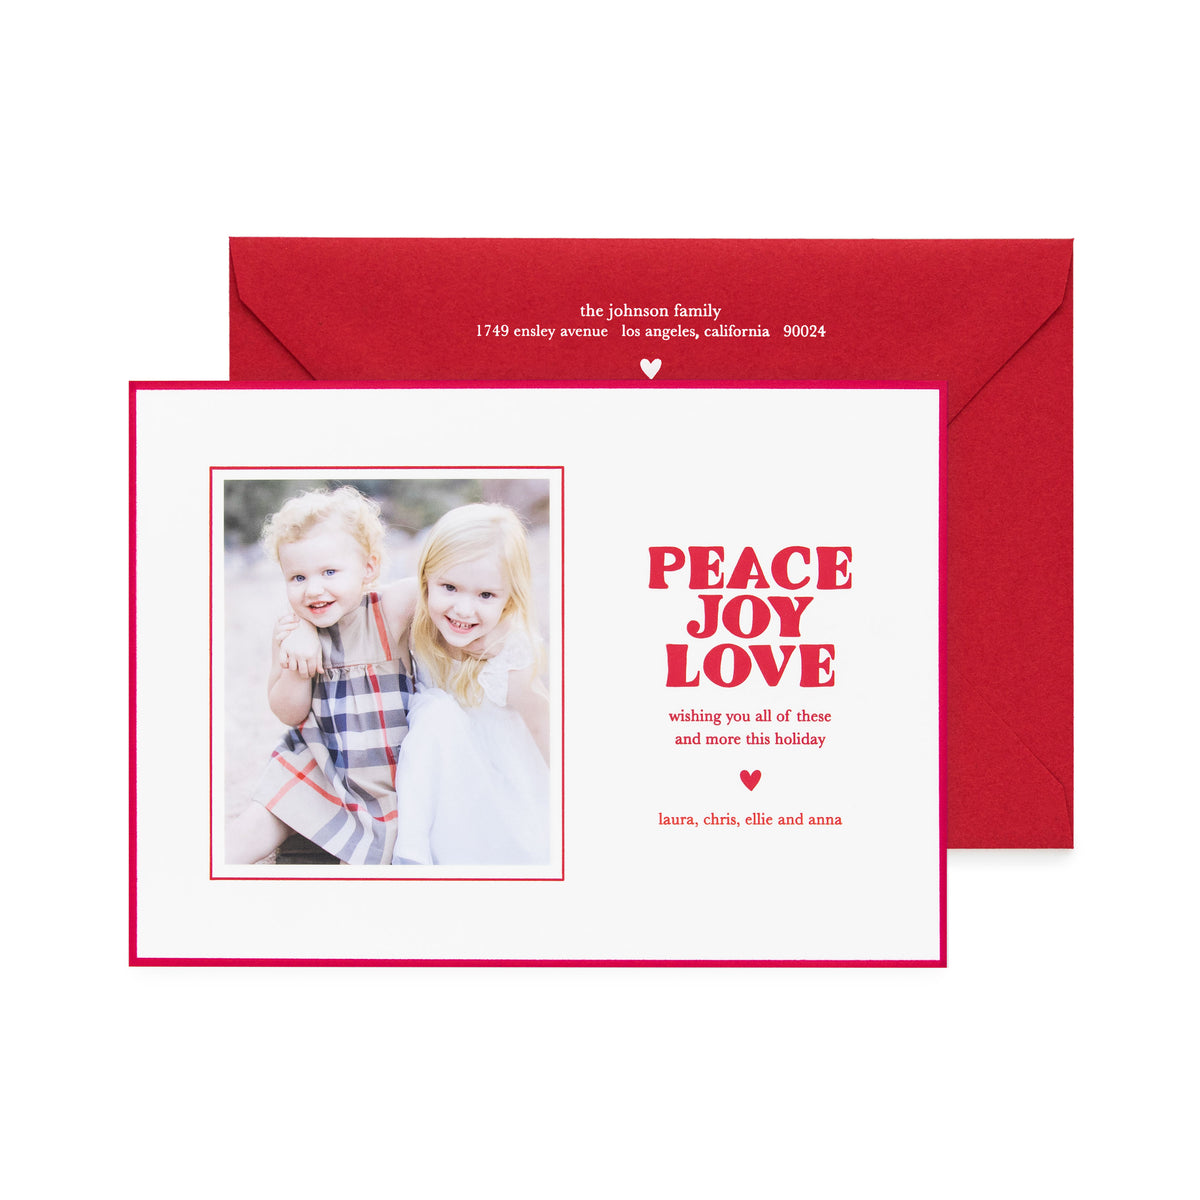 white card with photo and red text, red envelope with white text